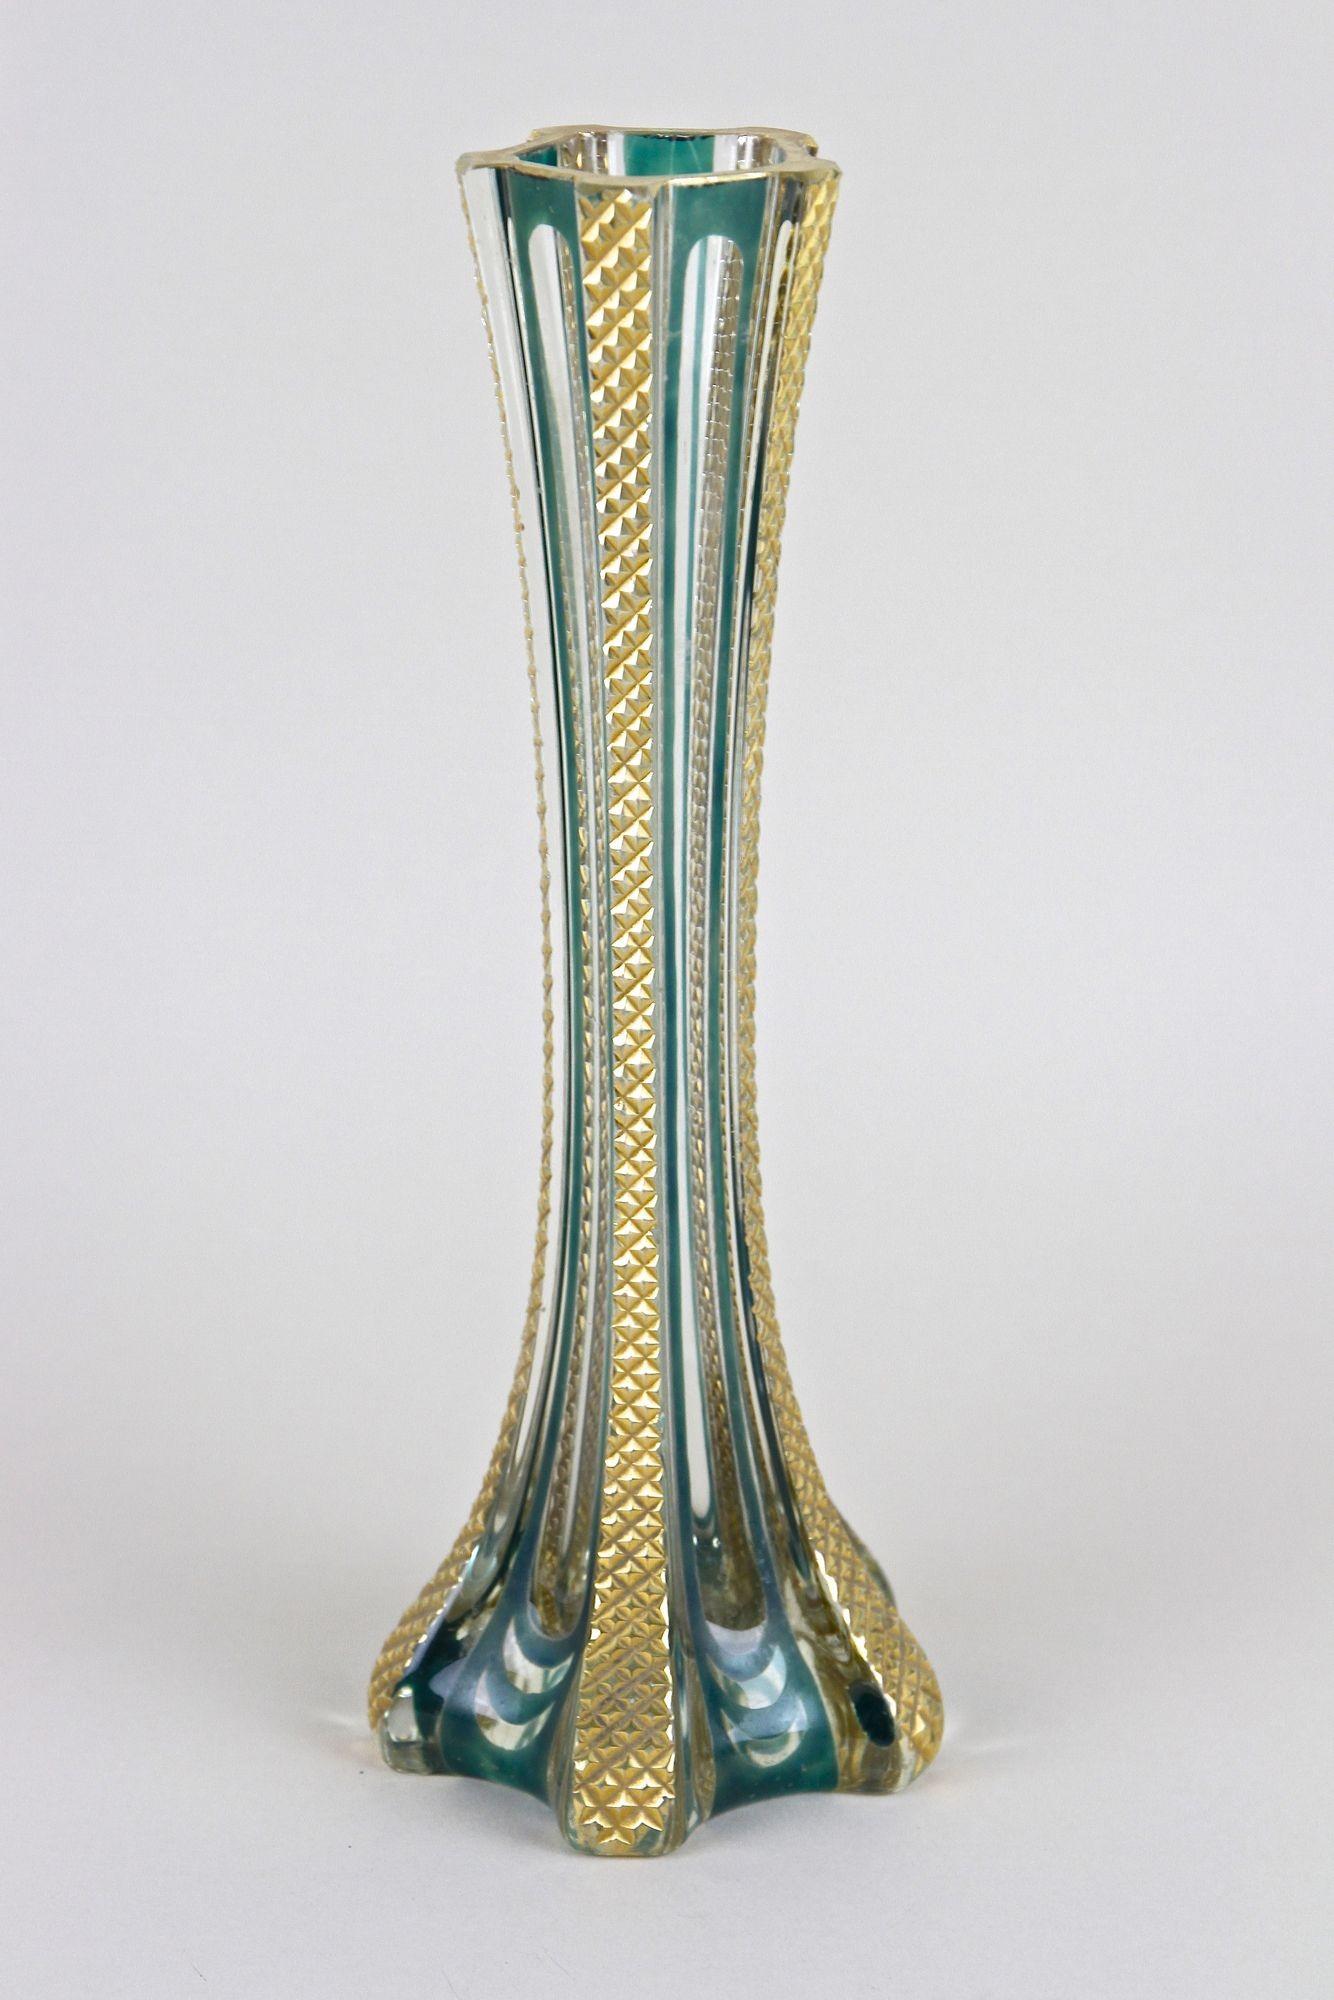 Murano Glass Vase With Gold Accents, Early 20th Century - Italy ca. 1930 In Good Condition For Sale In Lichtenberg, AT